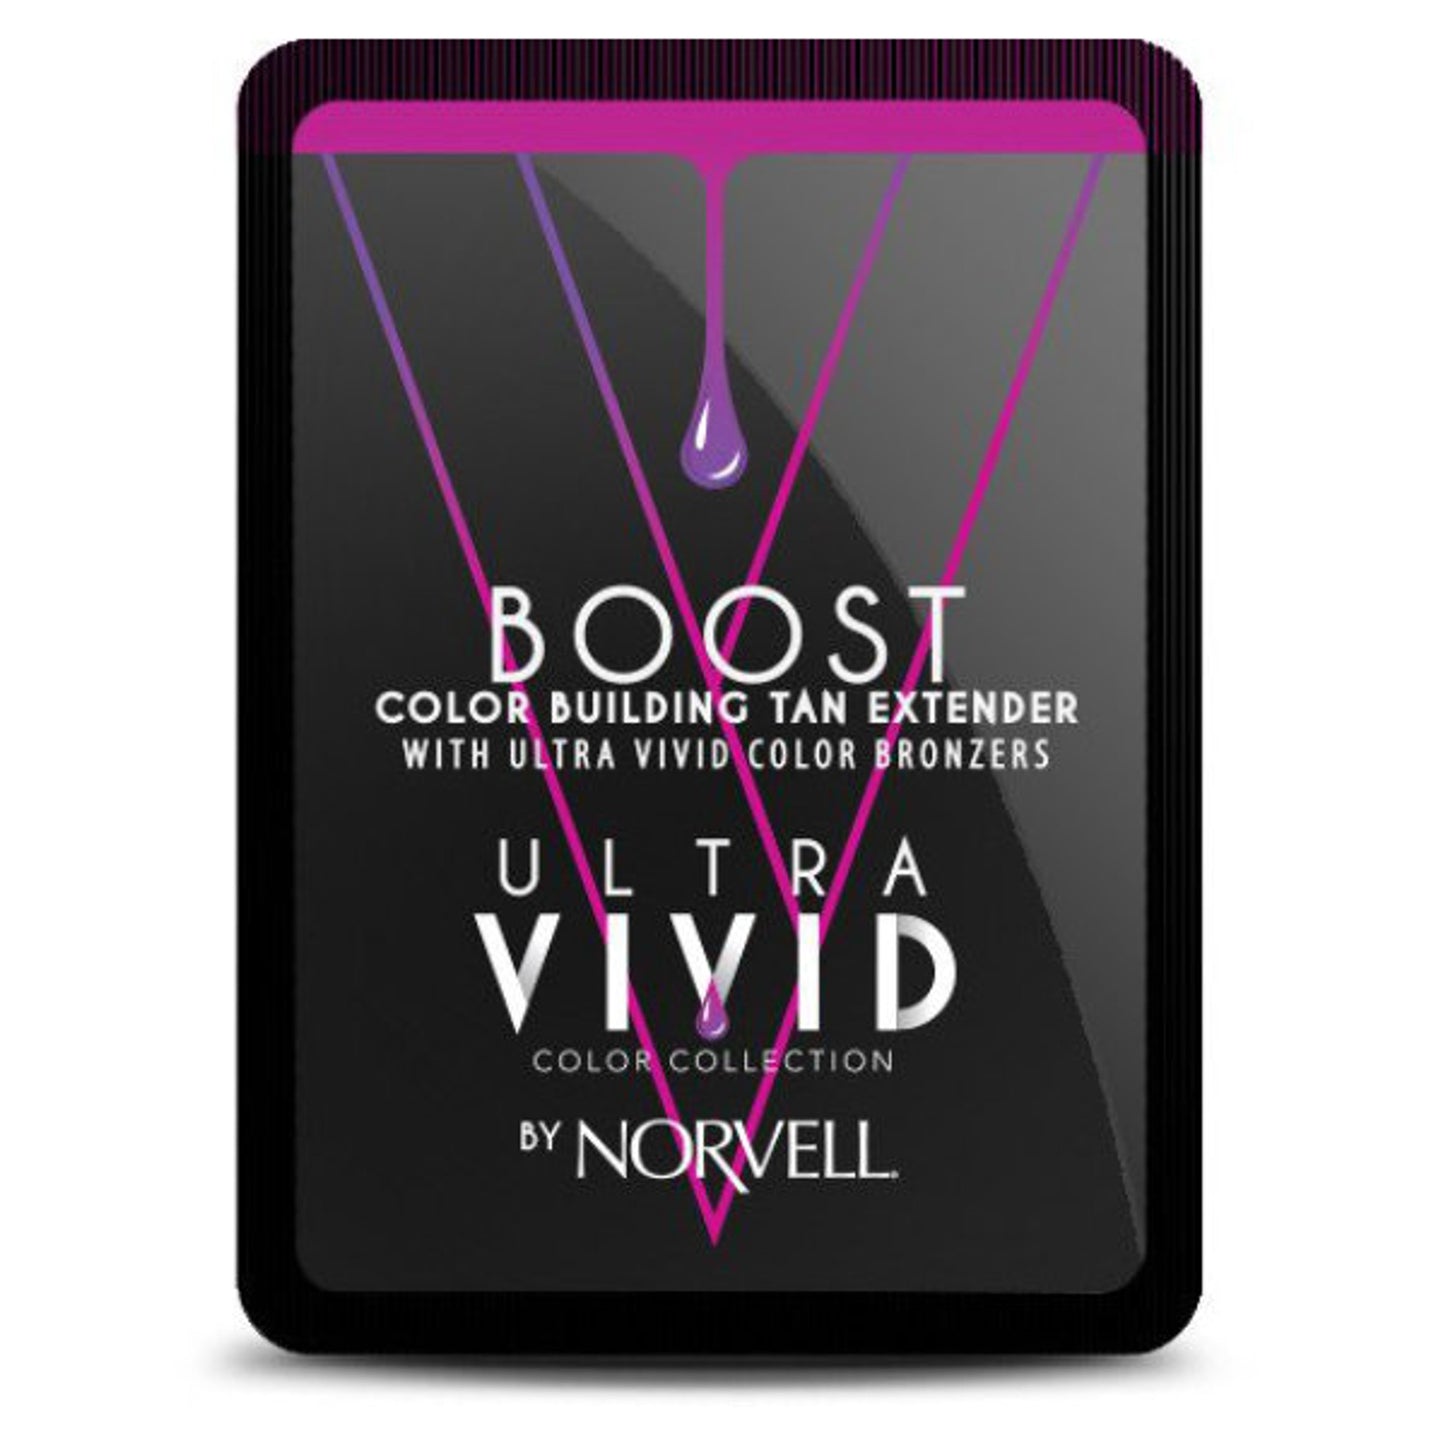 Norvell BOOST SELF TAN LOTION - Ultra VIVID Color Collection